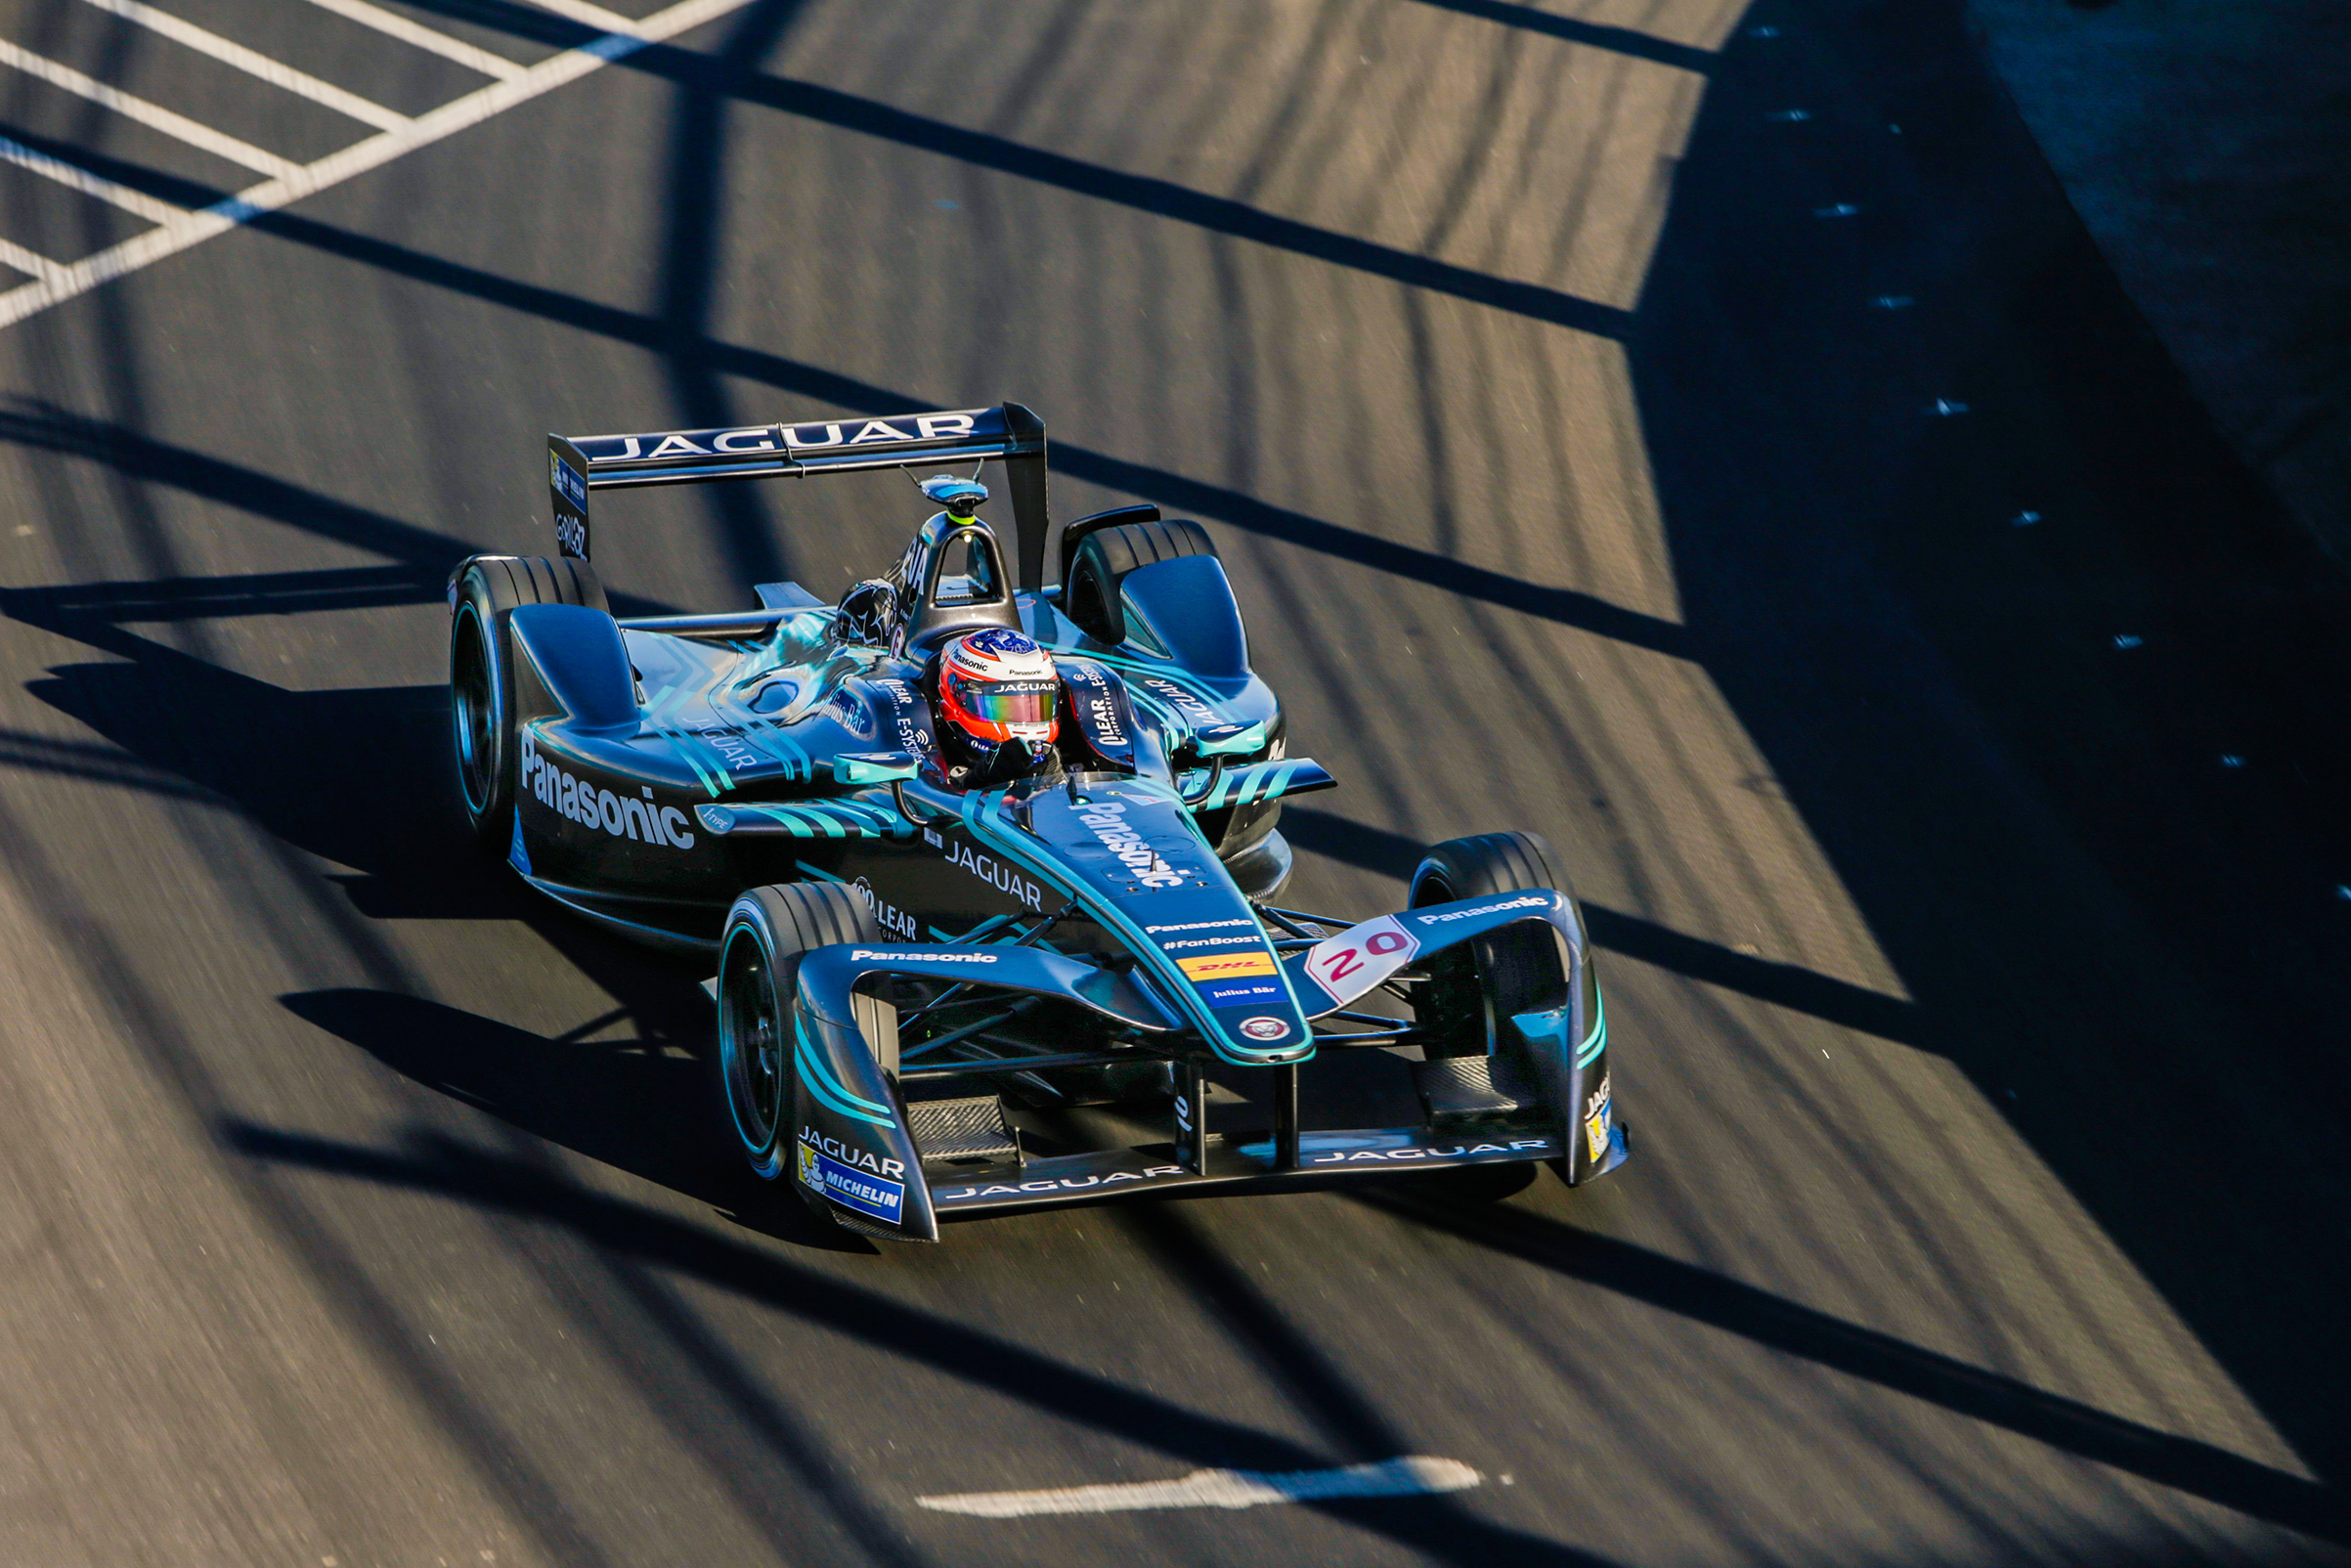 A custom microgrid powered the electric race cars at the Formula E event in Brooklyn in July (Andrew Ferraro—FIA Formula E/Getty Images)